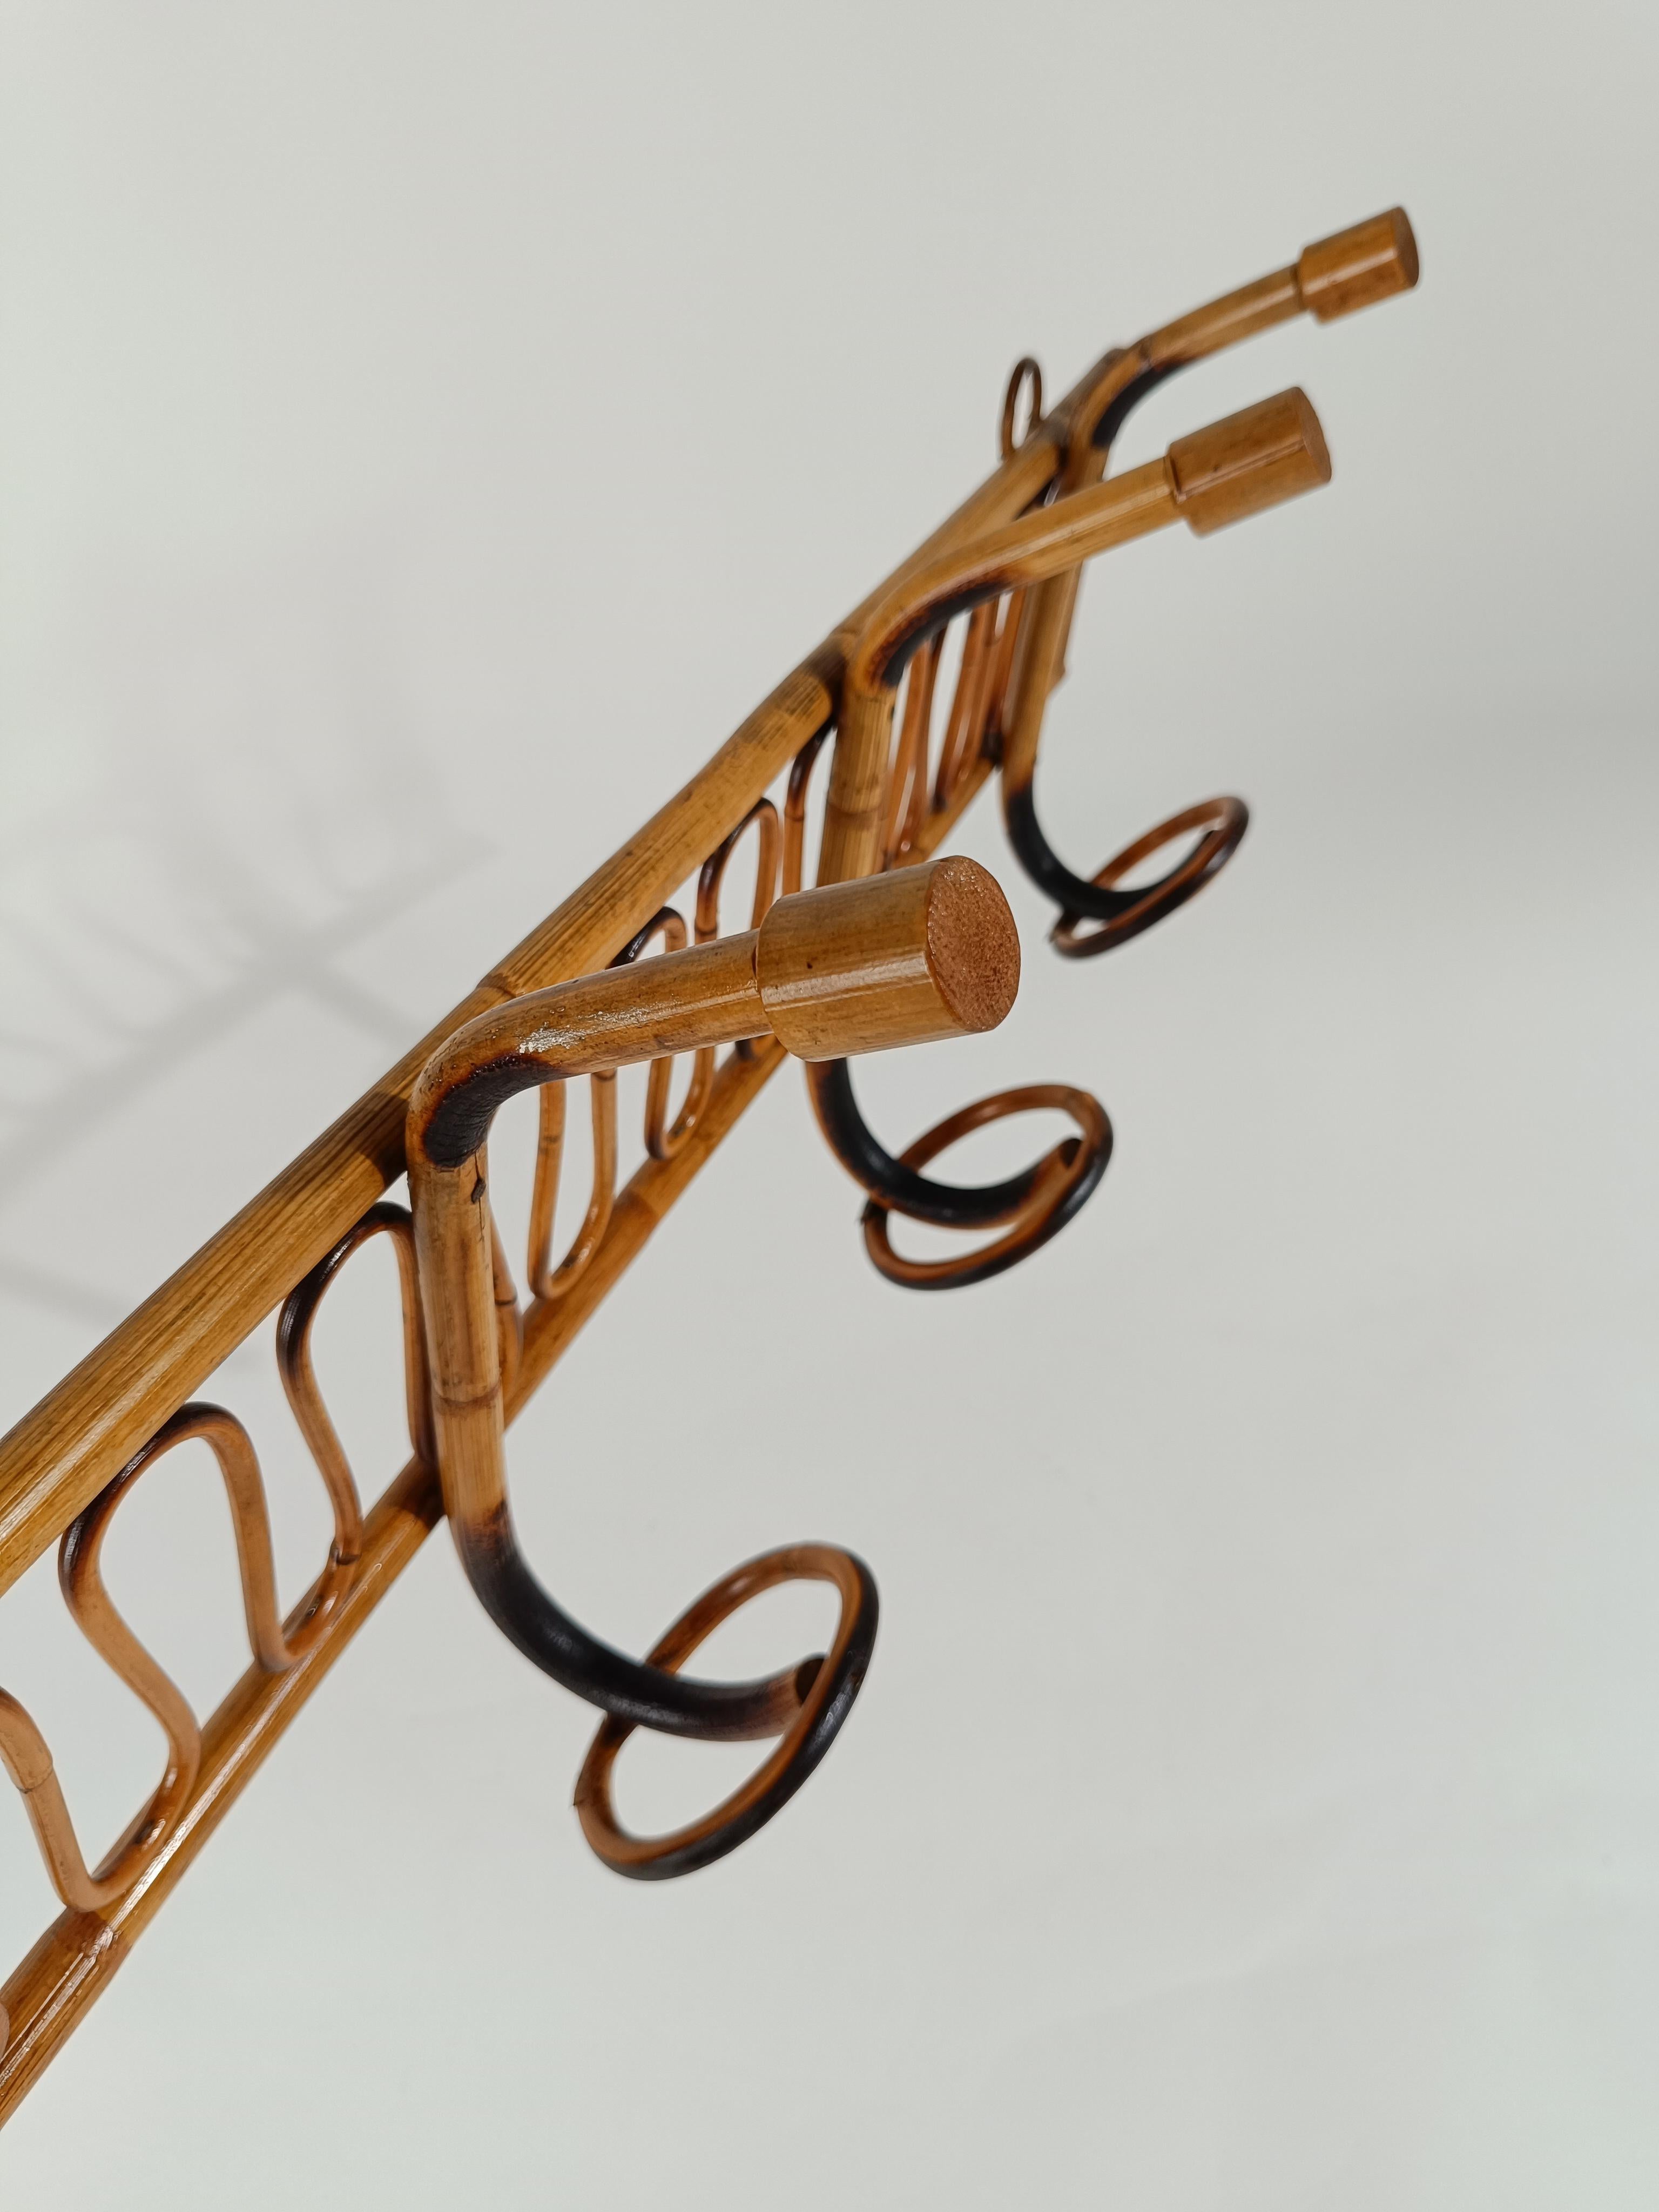 Midcentury Italian Riviera Rattan and Bamboo Wall Coat Rack / Wall Hanger 1960s For Sale 2